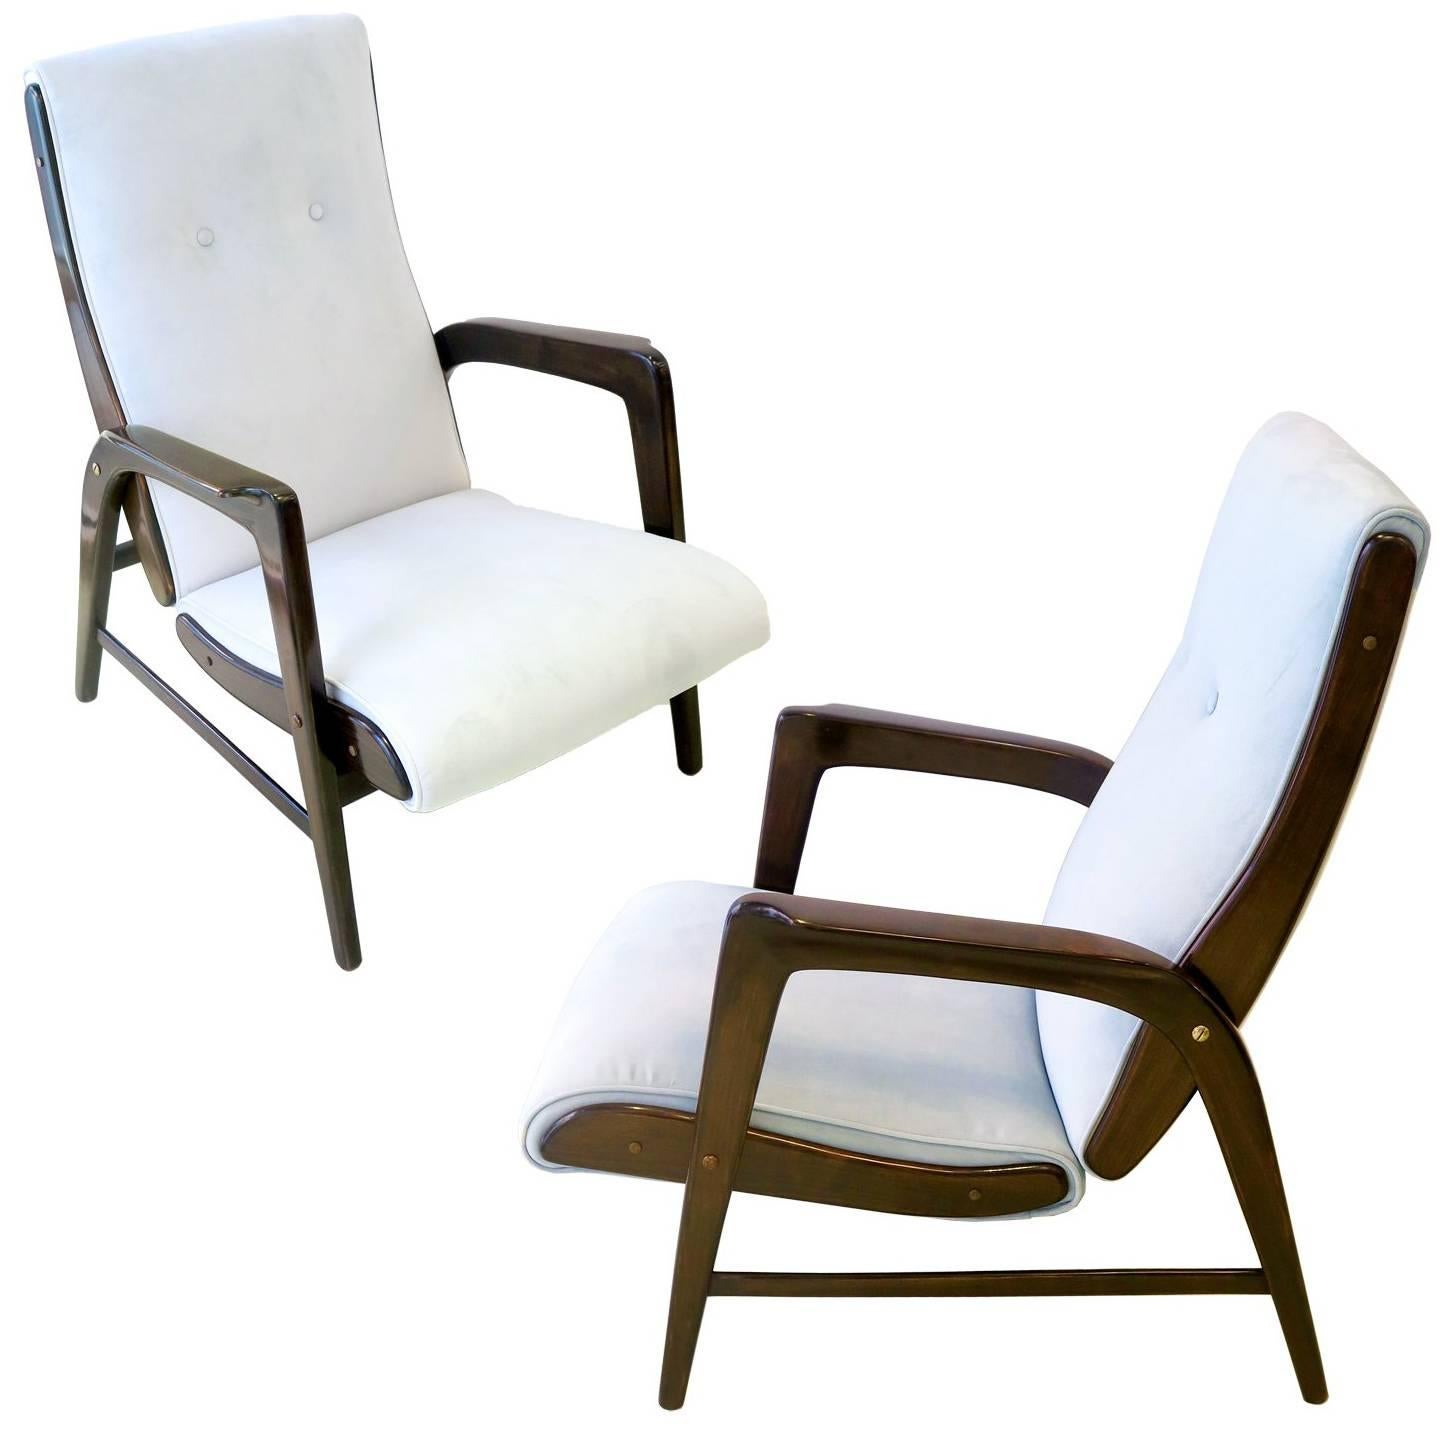 Gio Ponti Pair of Armchairs from the "Paradiso del Cevedale" Hotel